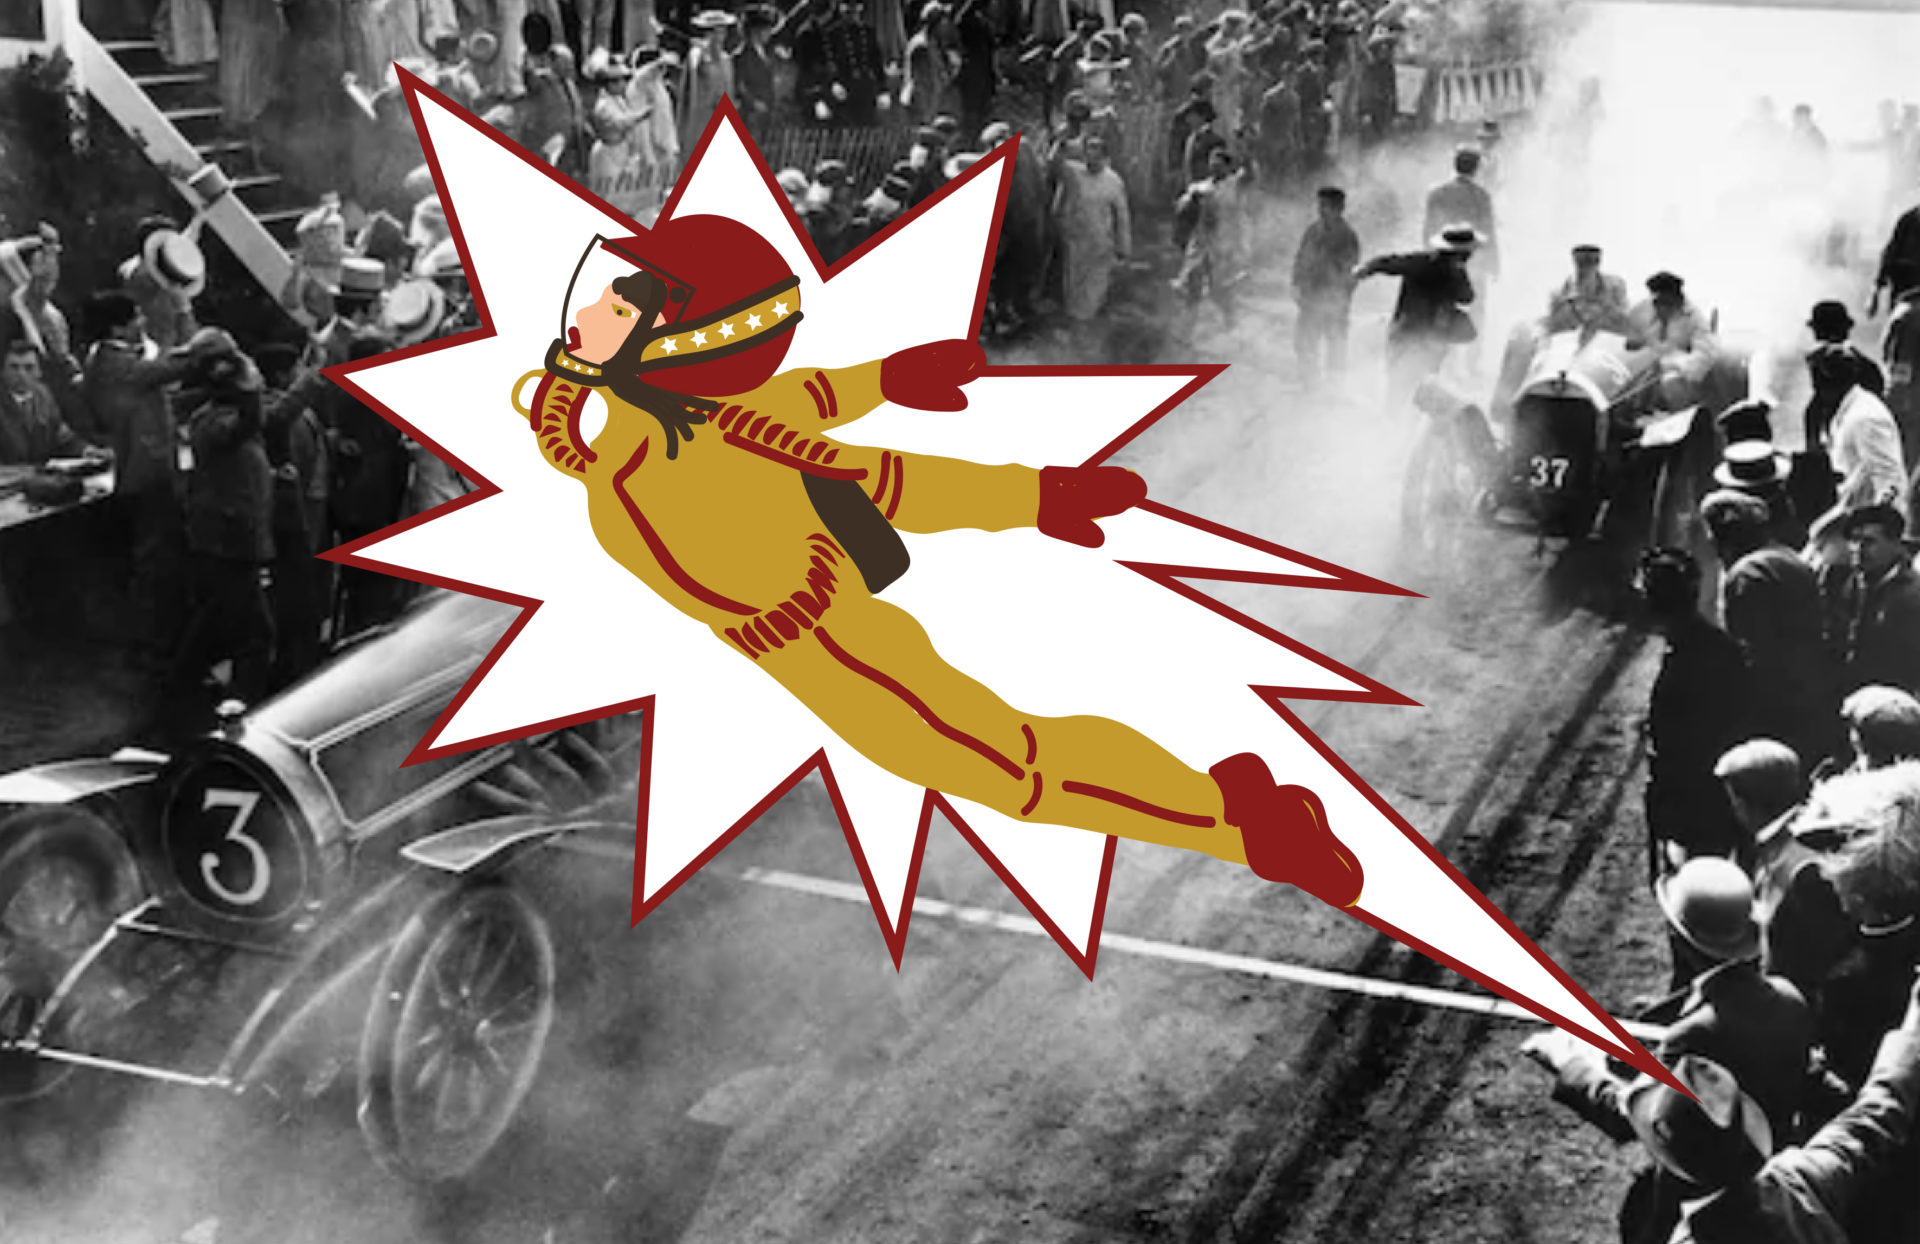 A stuntwoman wearing a suit and helmet inside an explosive illustration. She is flying through the air. Behind her is an old black-and-white photo of people gathering around racecars on a road.